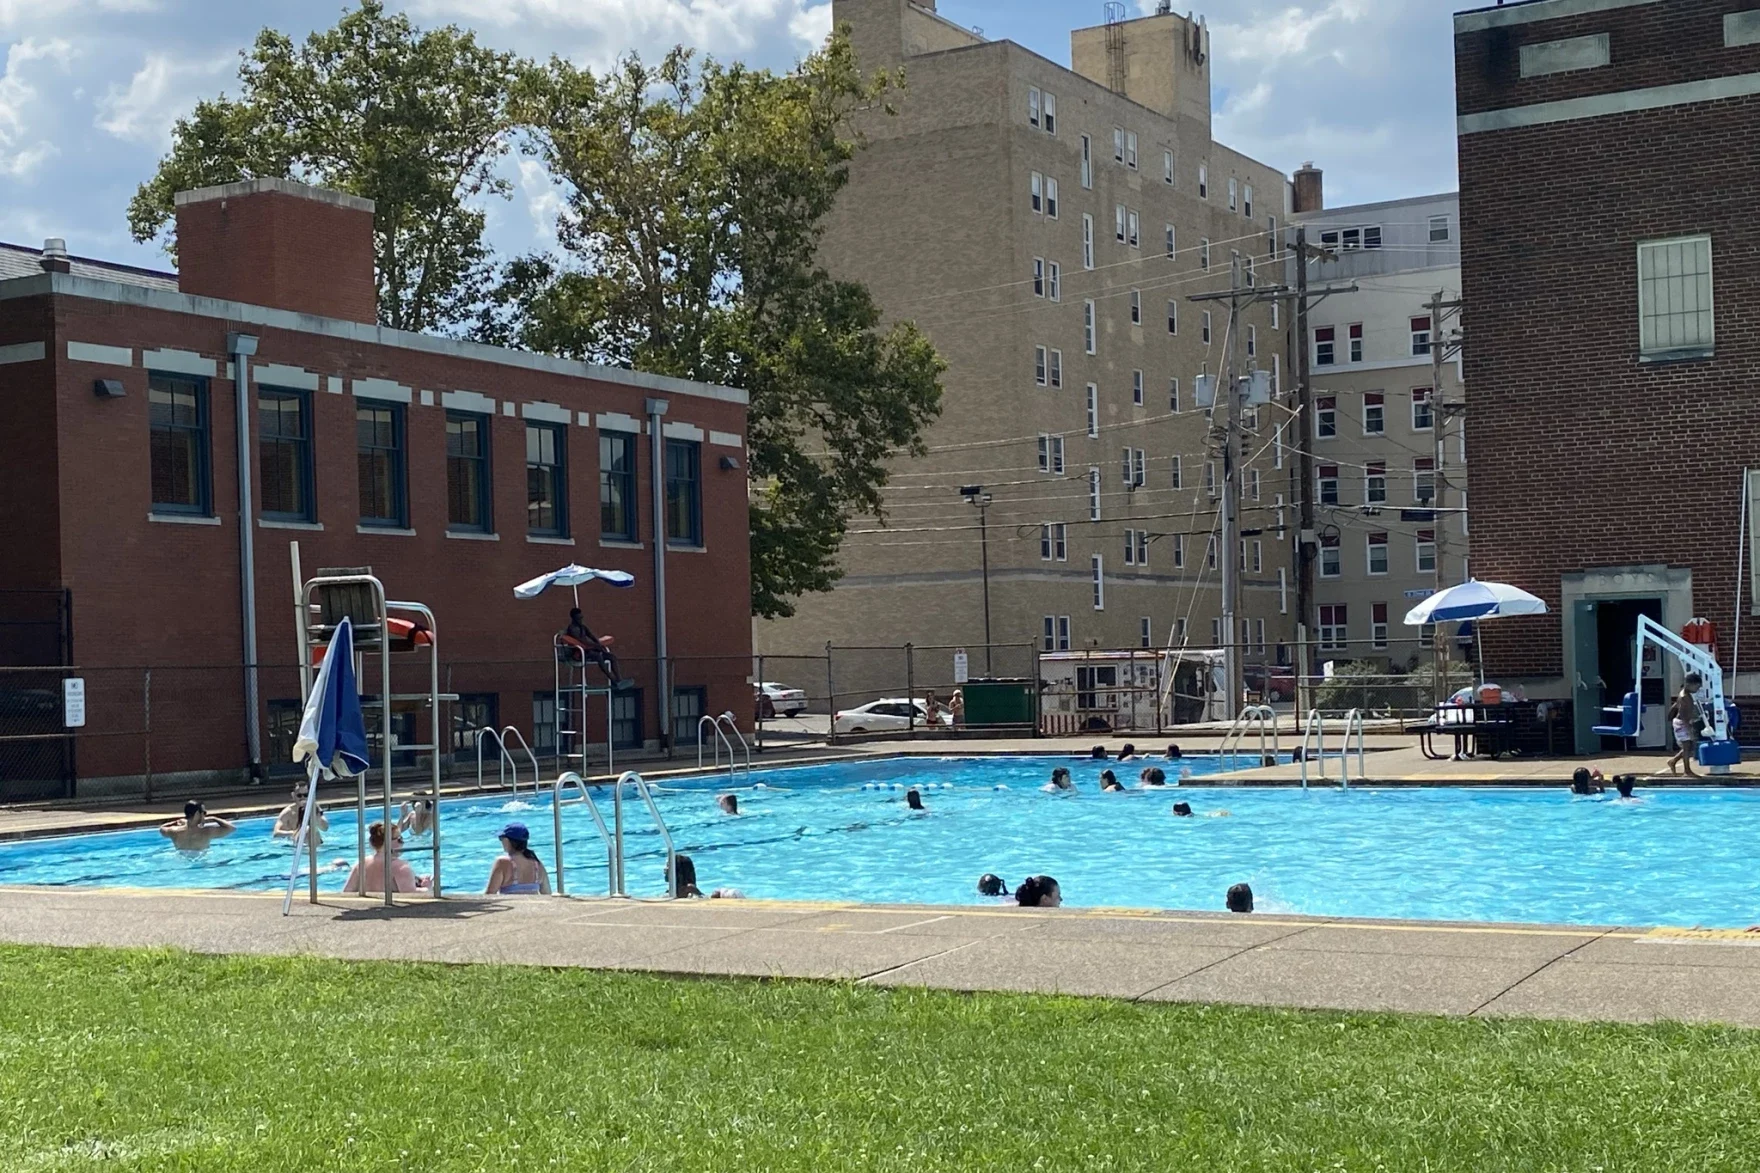 A swimming pool in an urban setting with buildings in the back ground